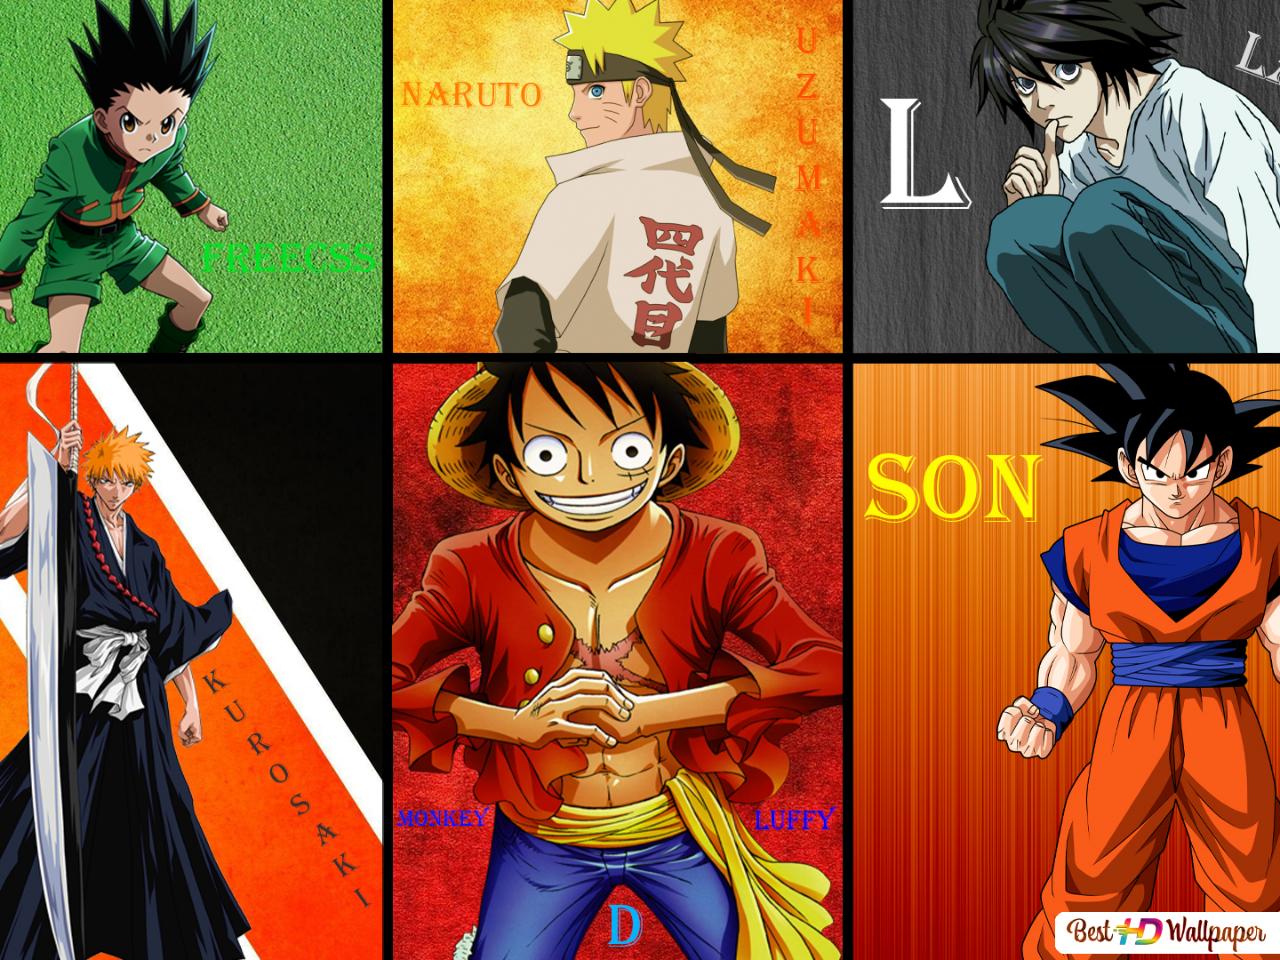 The Big 4 ツNaruto, One Piece, Bleach and Fairy Tailツ